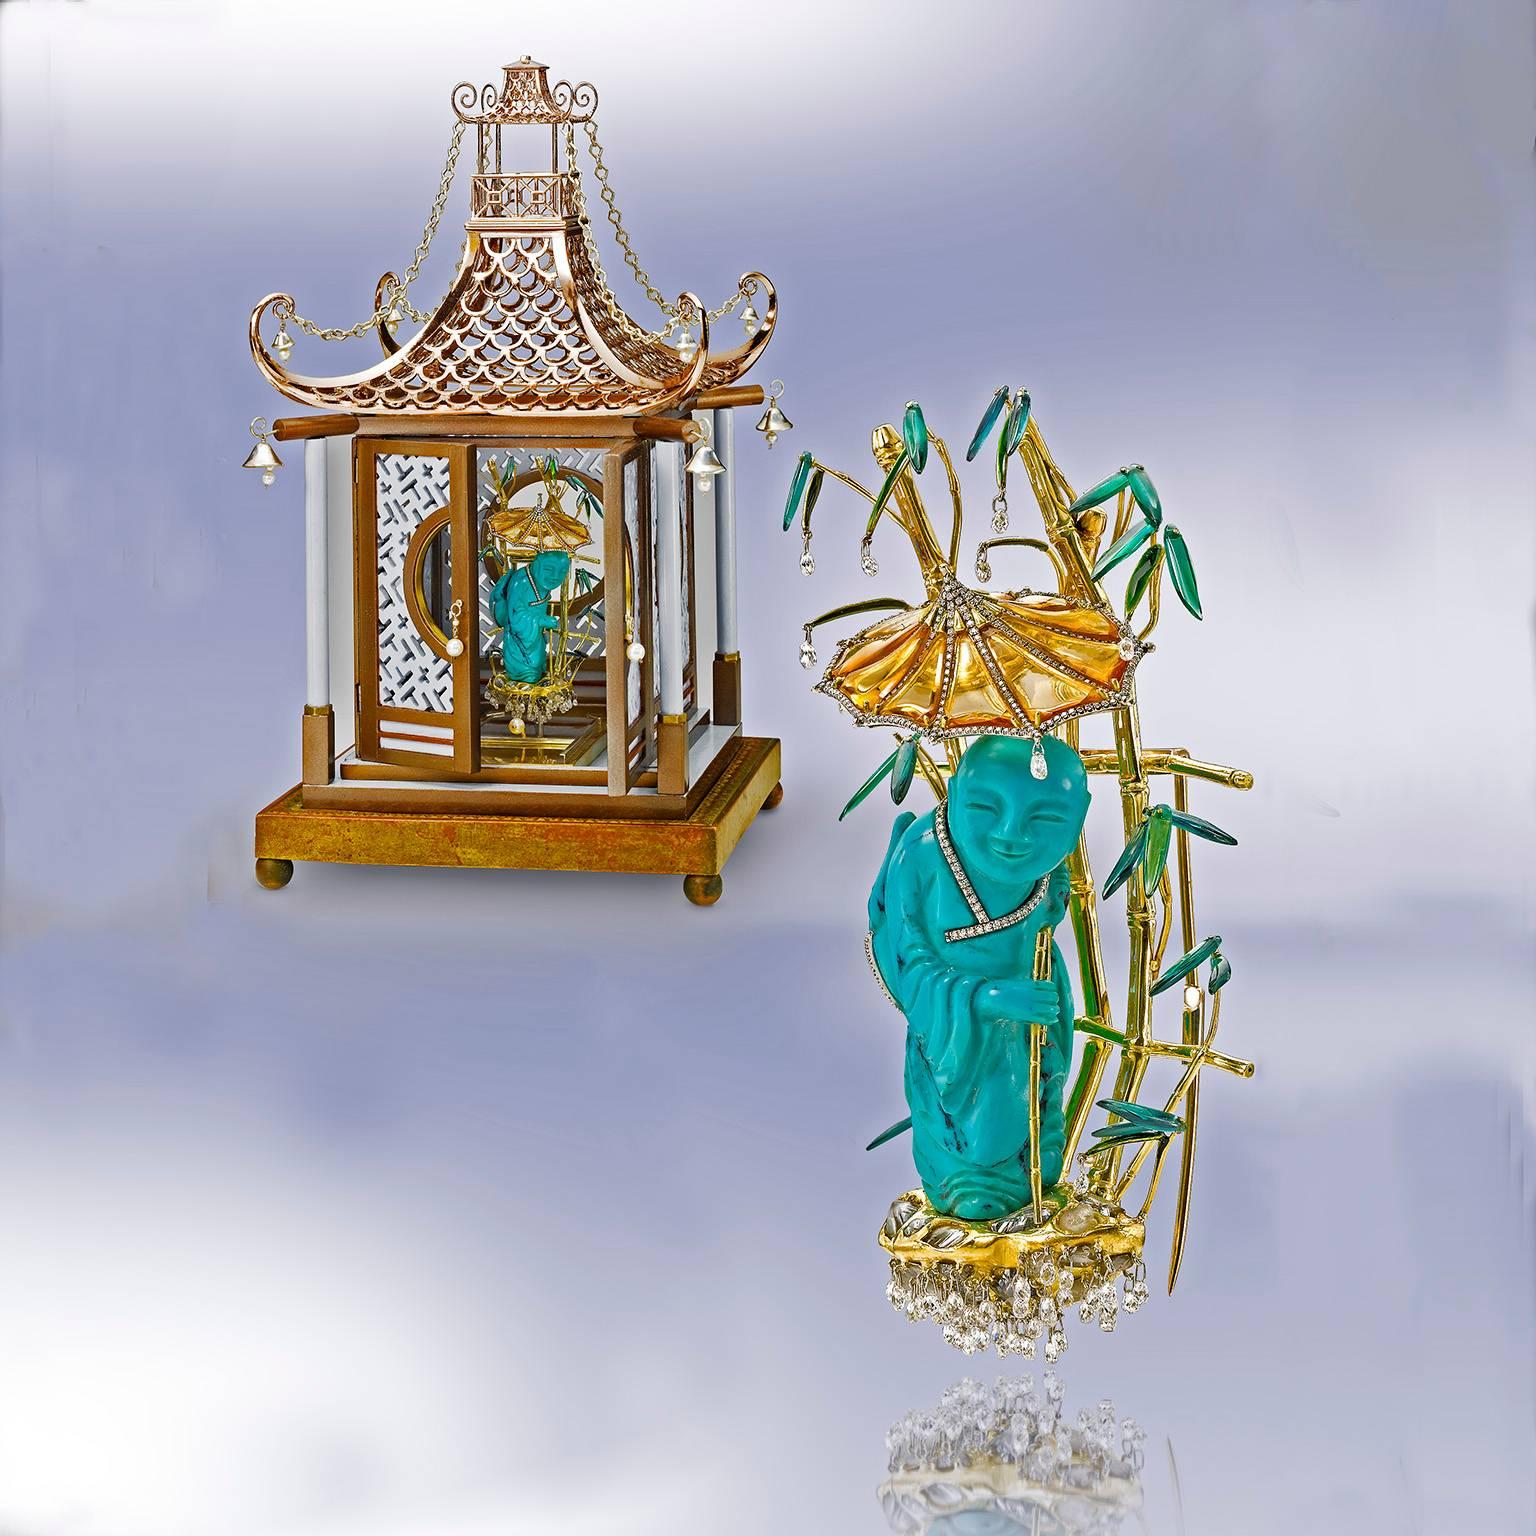 Chinoiserie style brooch is an antique turquoise craving of a man carrying a bag on his back in the form of a frog. His robe and a bag are set with diamonds. He is walking in the rain through a bamboo forest made of 18K gold set with custom cut